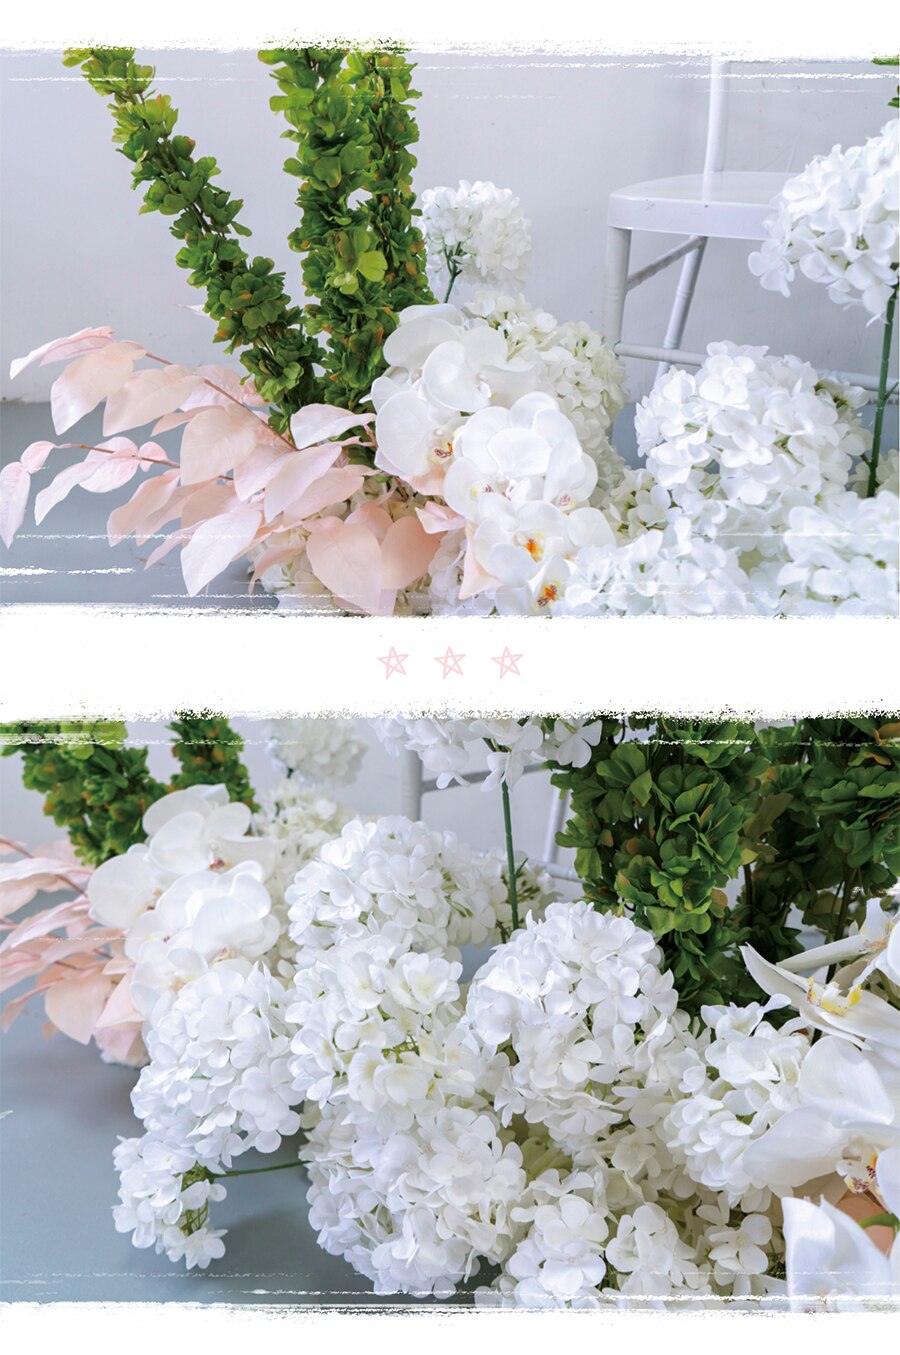 flower arrangements with lily of the valley3